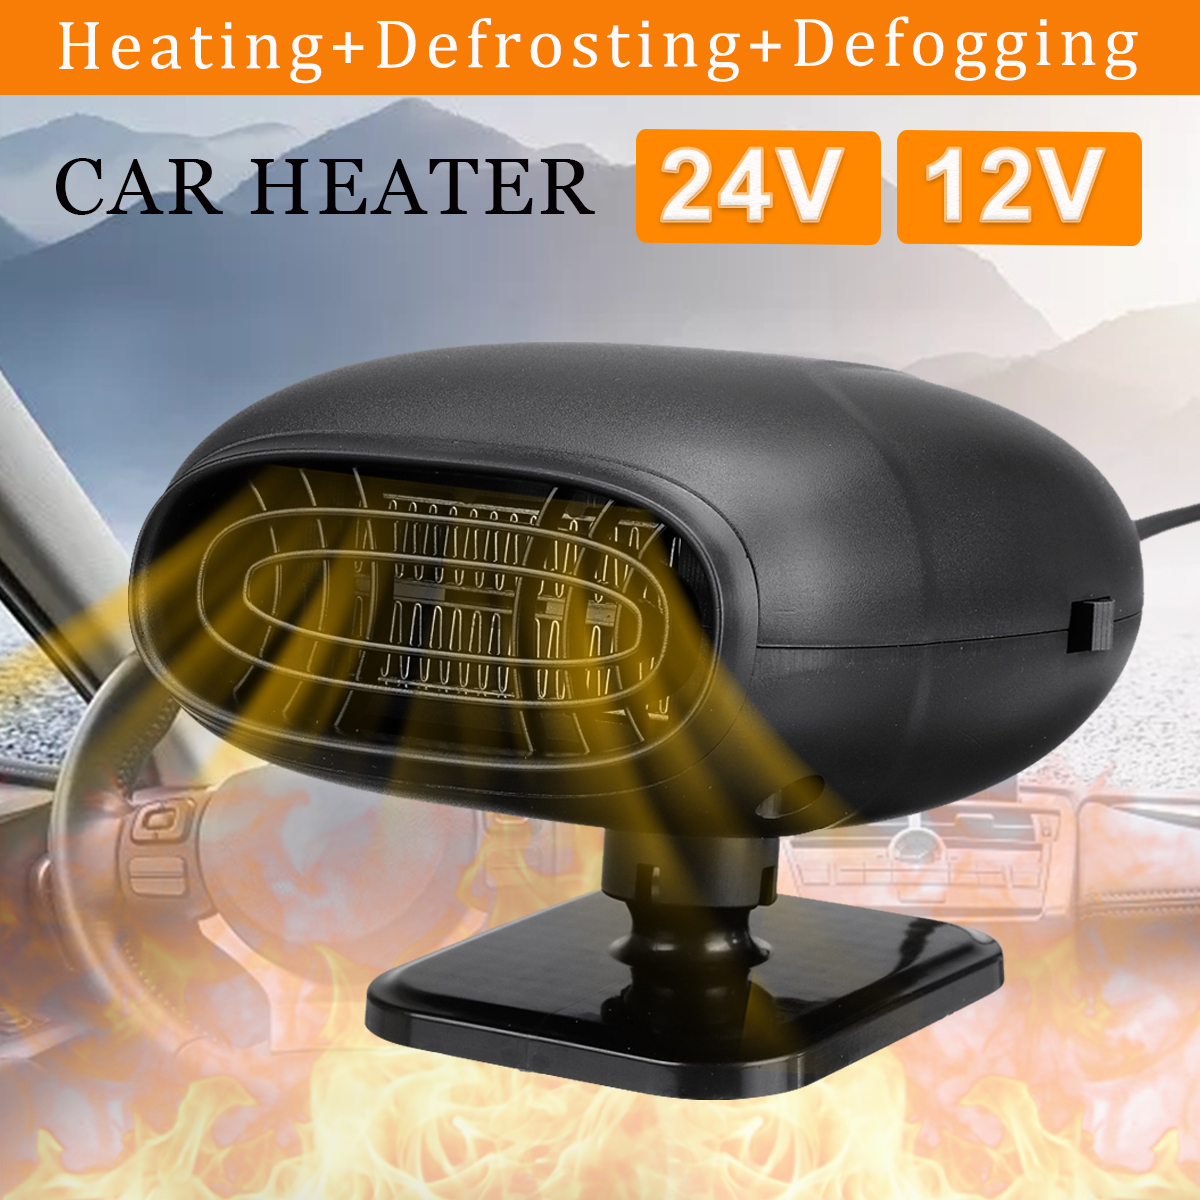 3-IN-1-12V24V-Portable-Vehicle-Heater-360deg-Rotating-Car-Auto-Electric-Heater-Heating-Cooling-Fan-D-1809957-1